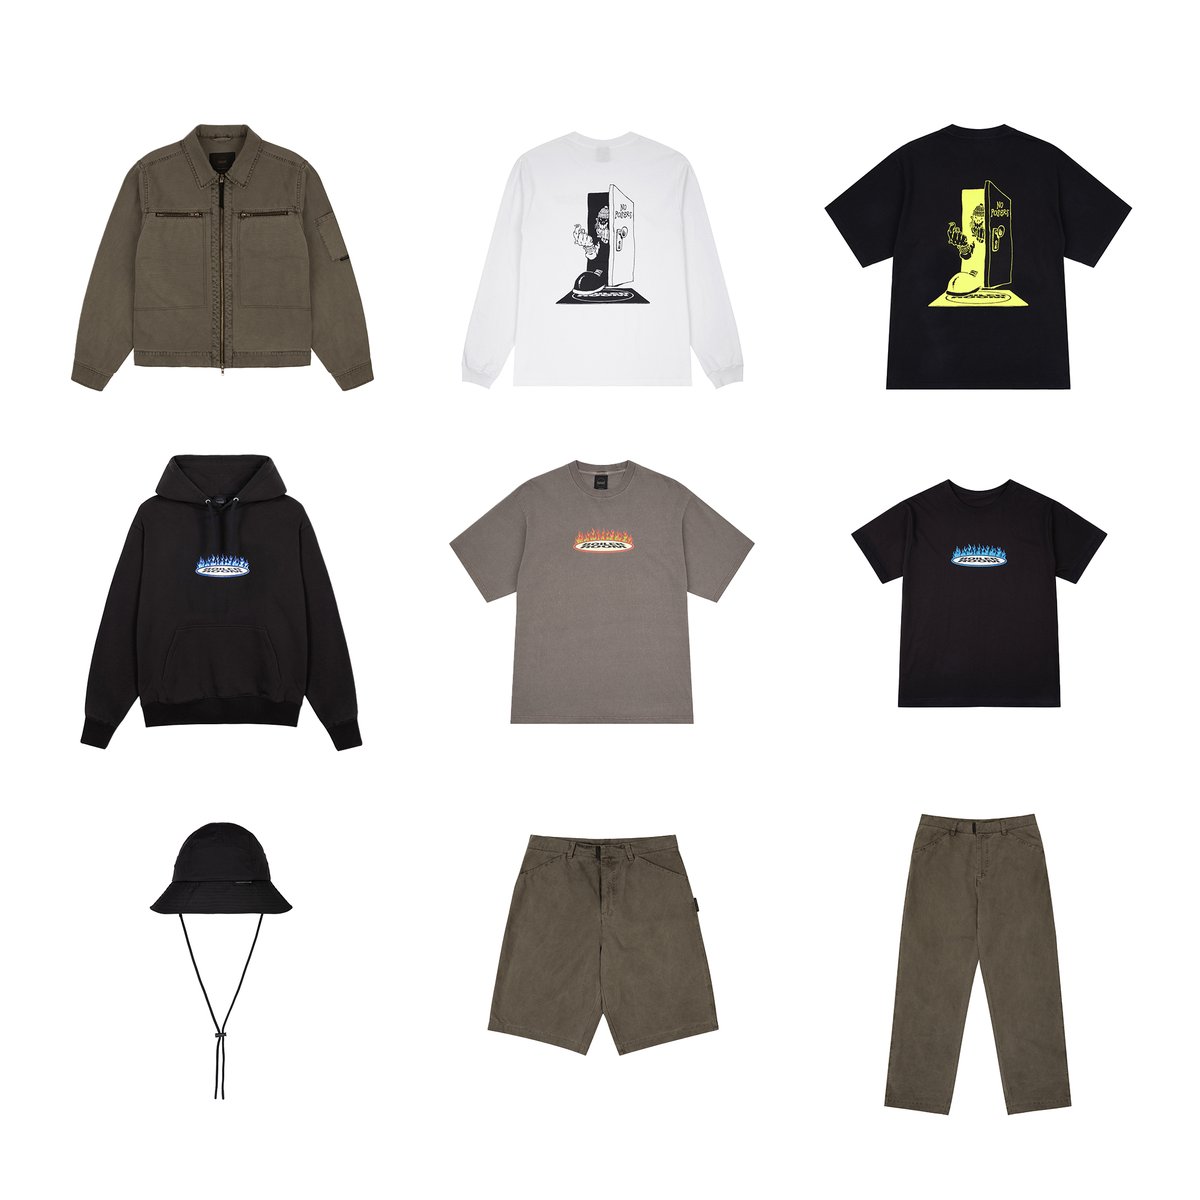 New Boiler Room apparel is now live in the shop. Heavy-duty canvas jackets, trousers and shorts drop alongside our new ‘Flames’ and ‘No Posers’ graphics. Shop now: blrrm.tv/latest_arrival…